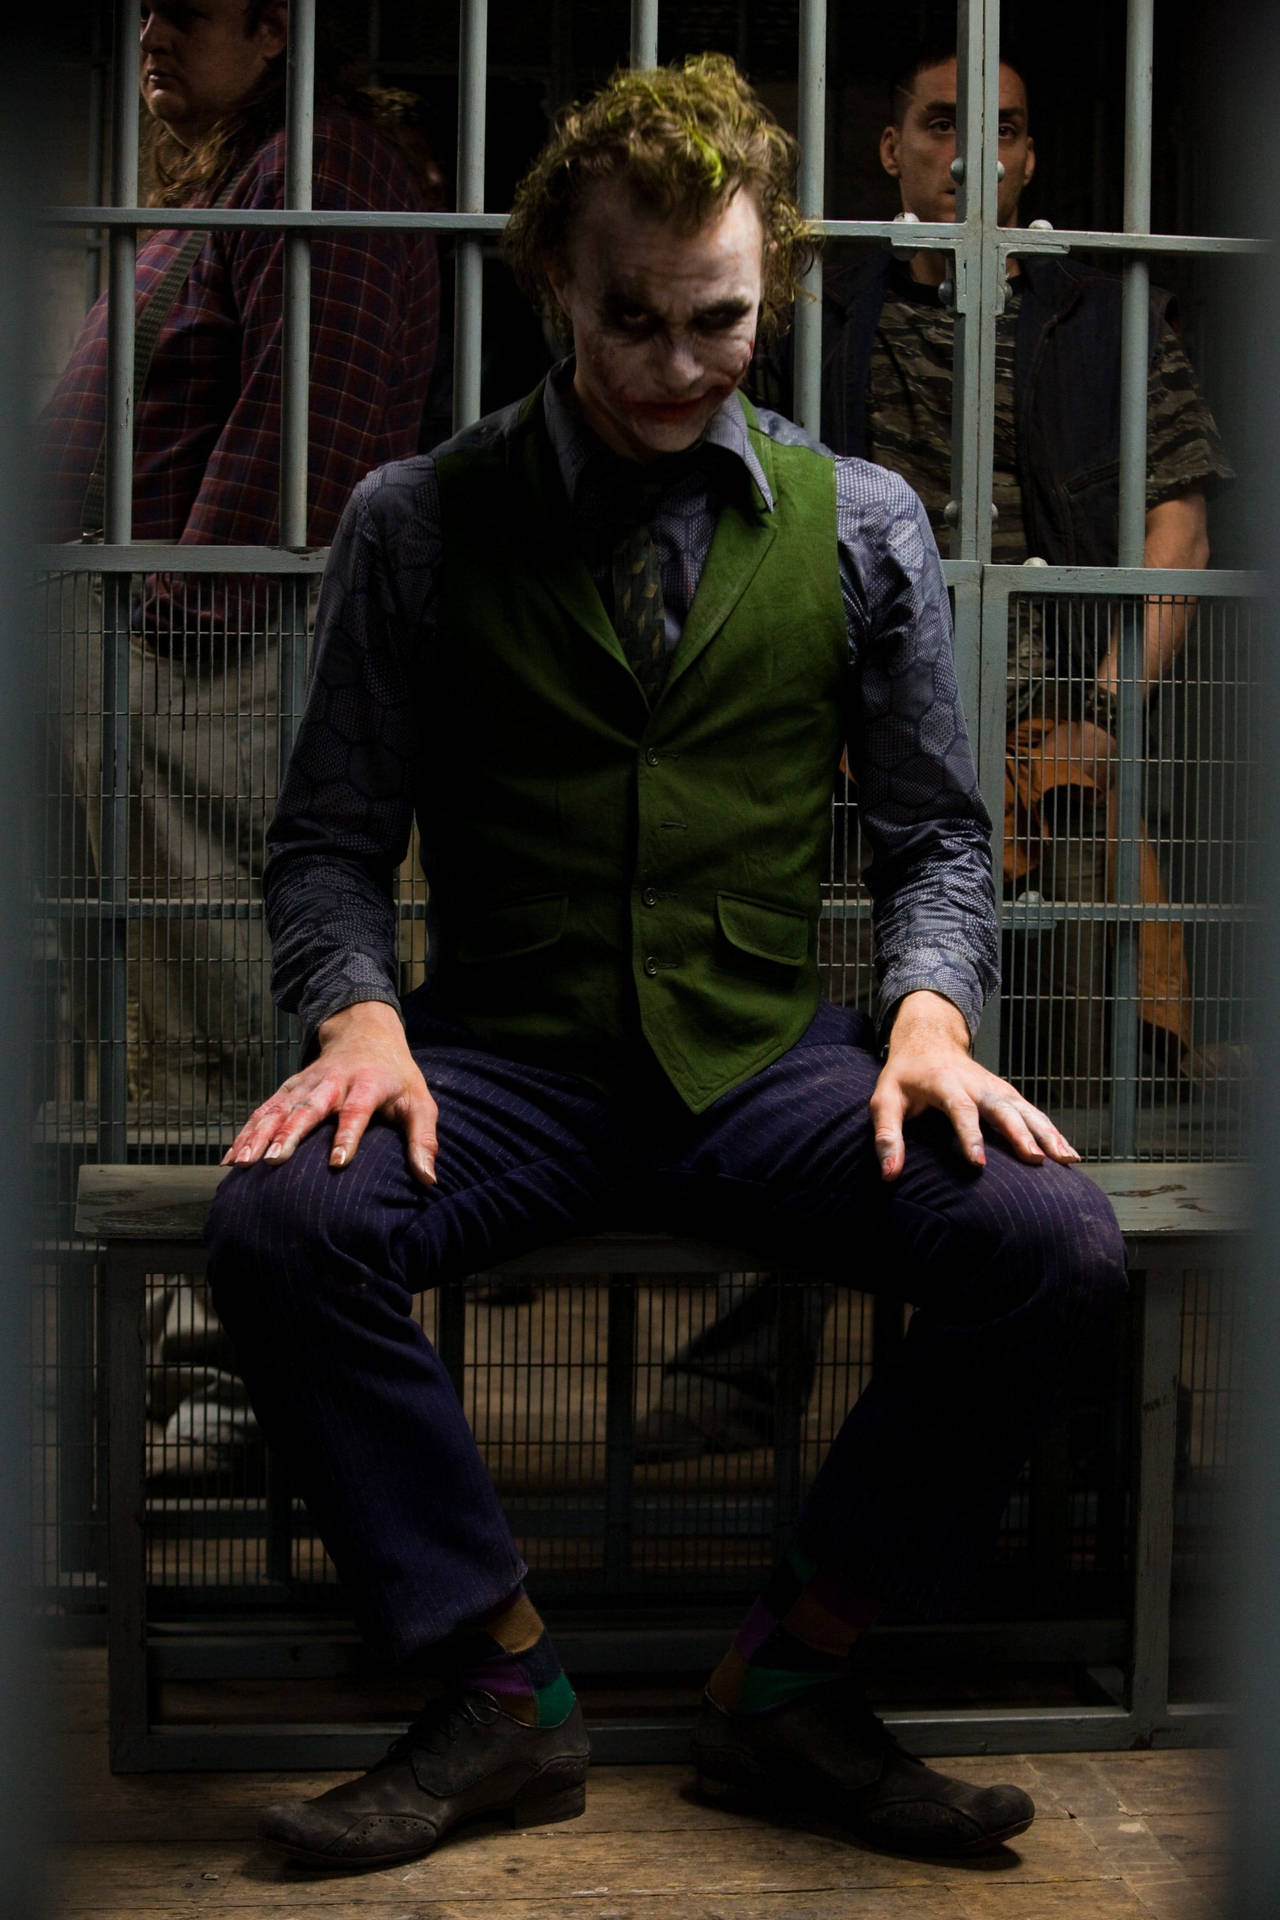 The Joker confined by Gotham City law Wallpaper